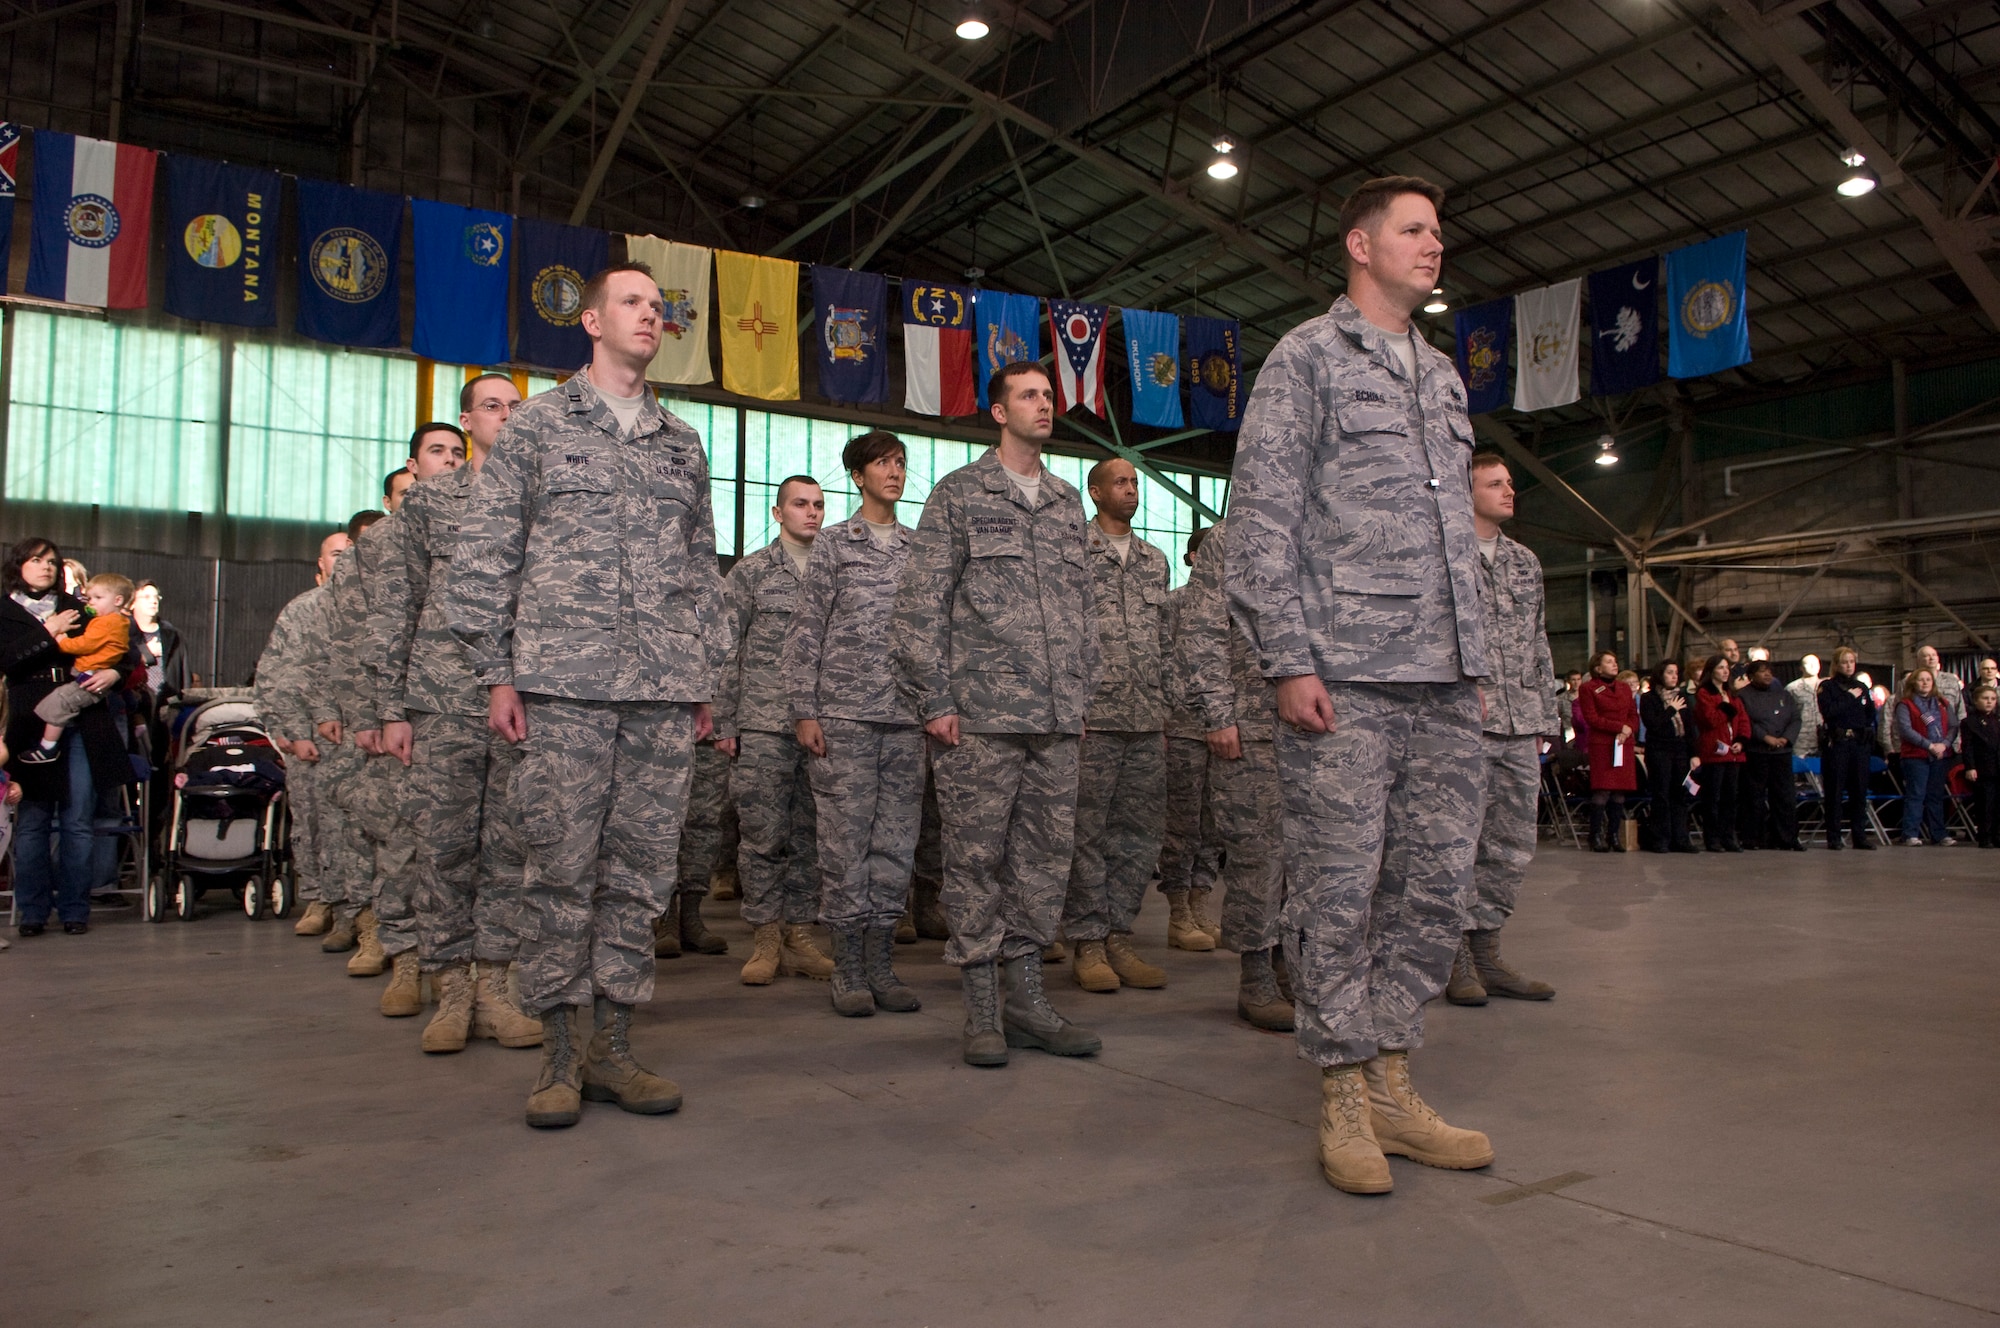 HANSCOM AIR FORCE BASE, Mass. - Lt. Col. Chris Echols, 66th Security Forces Squadron commander, stands at attention in command of a formation of Airmen returning from deployments over the past six months during the Heroes Homecoming reception at Hanscom Dec. 11. The event honored nearly 30 Airmen and their families for the sacrifices they have made and hosted guests from the Hanscom, local and Boston communities, including Air Force Materiel Command and Hanscom senior leadership, New England Patriots hall of famer John Hannah and other distinguished guests at the Hanscom Aero Club. (U.S. Air Force Photo by Mark Herlihy)